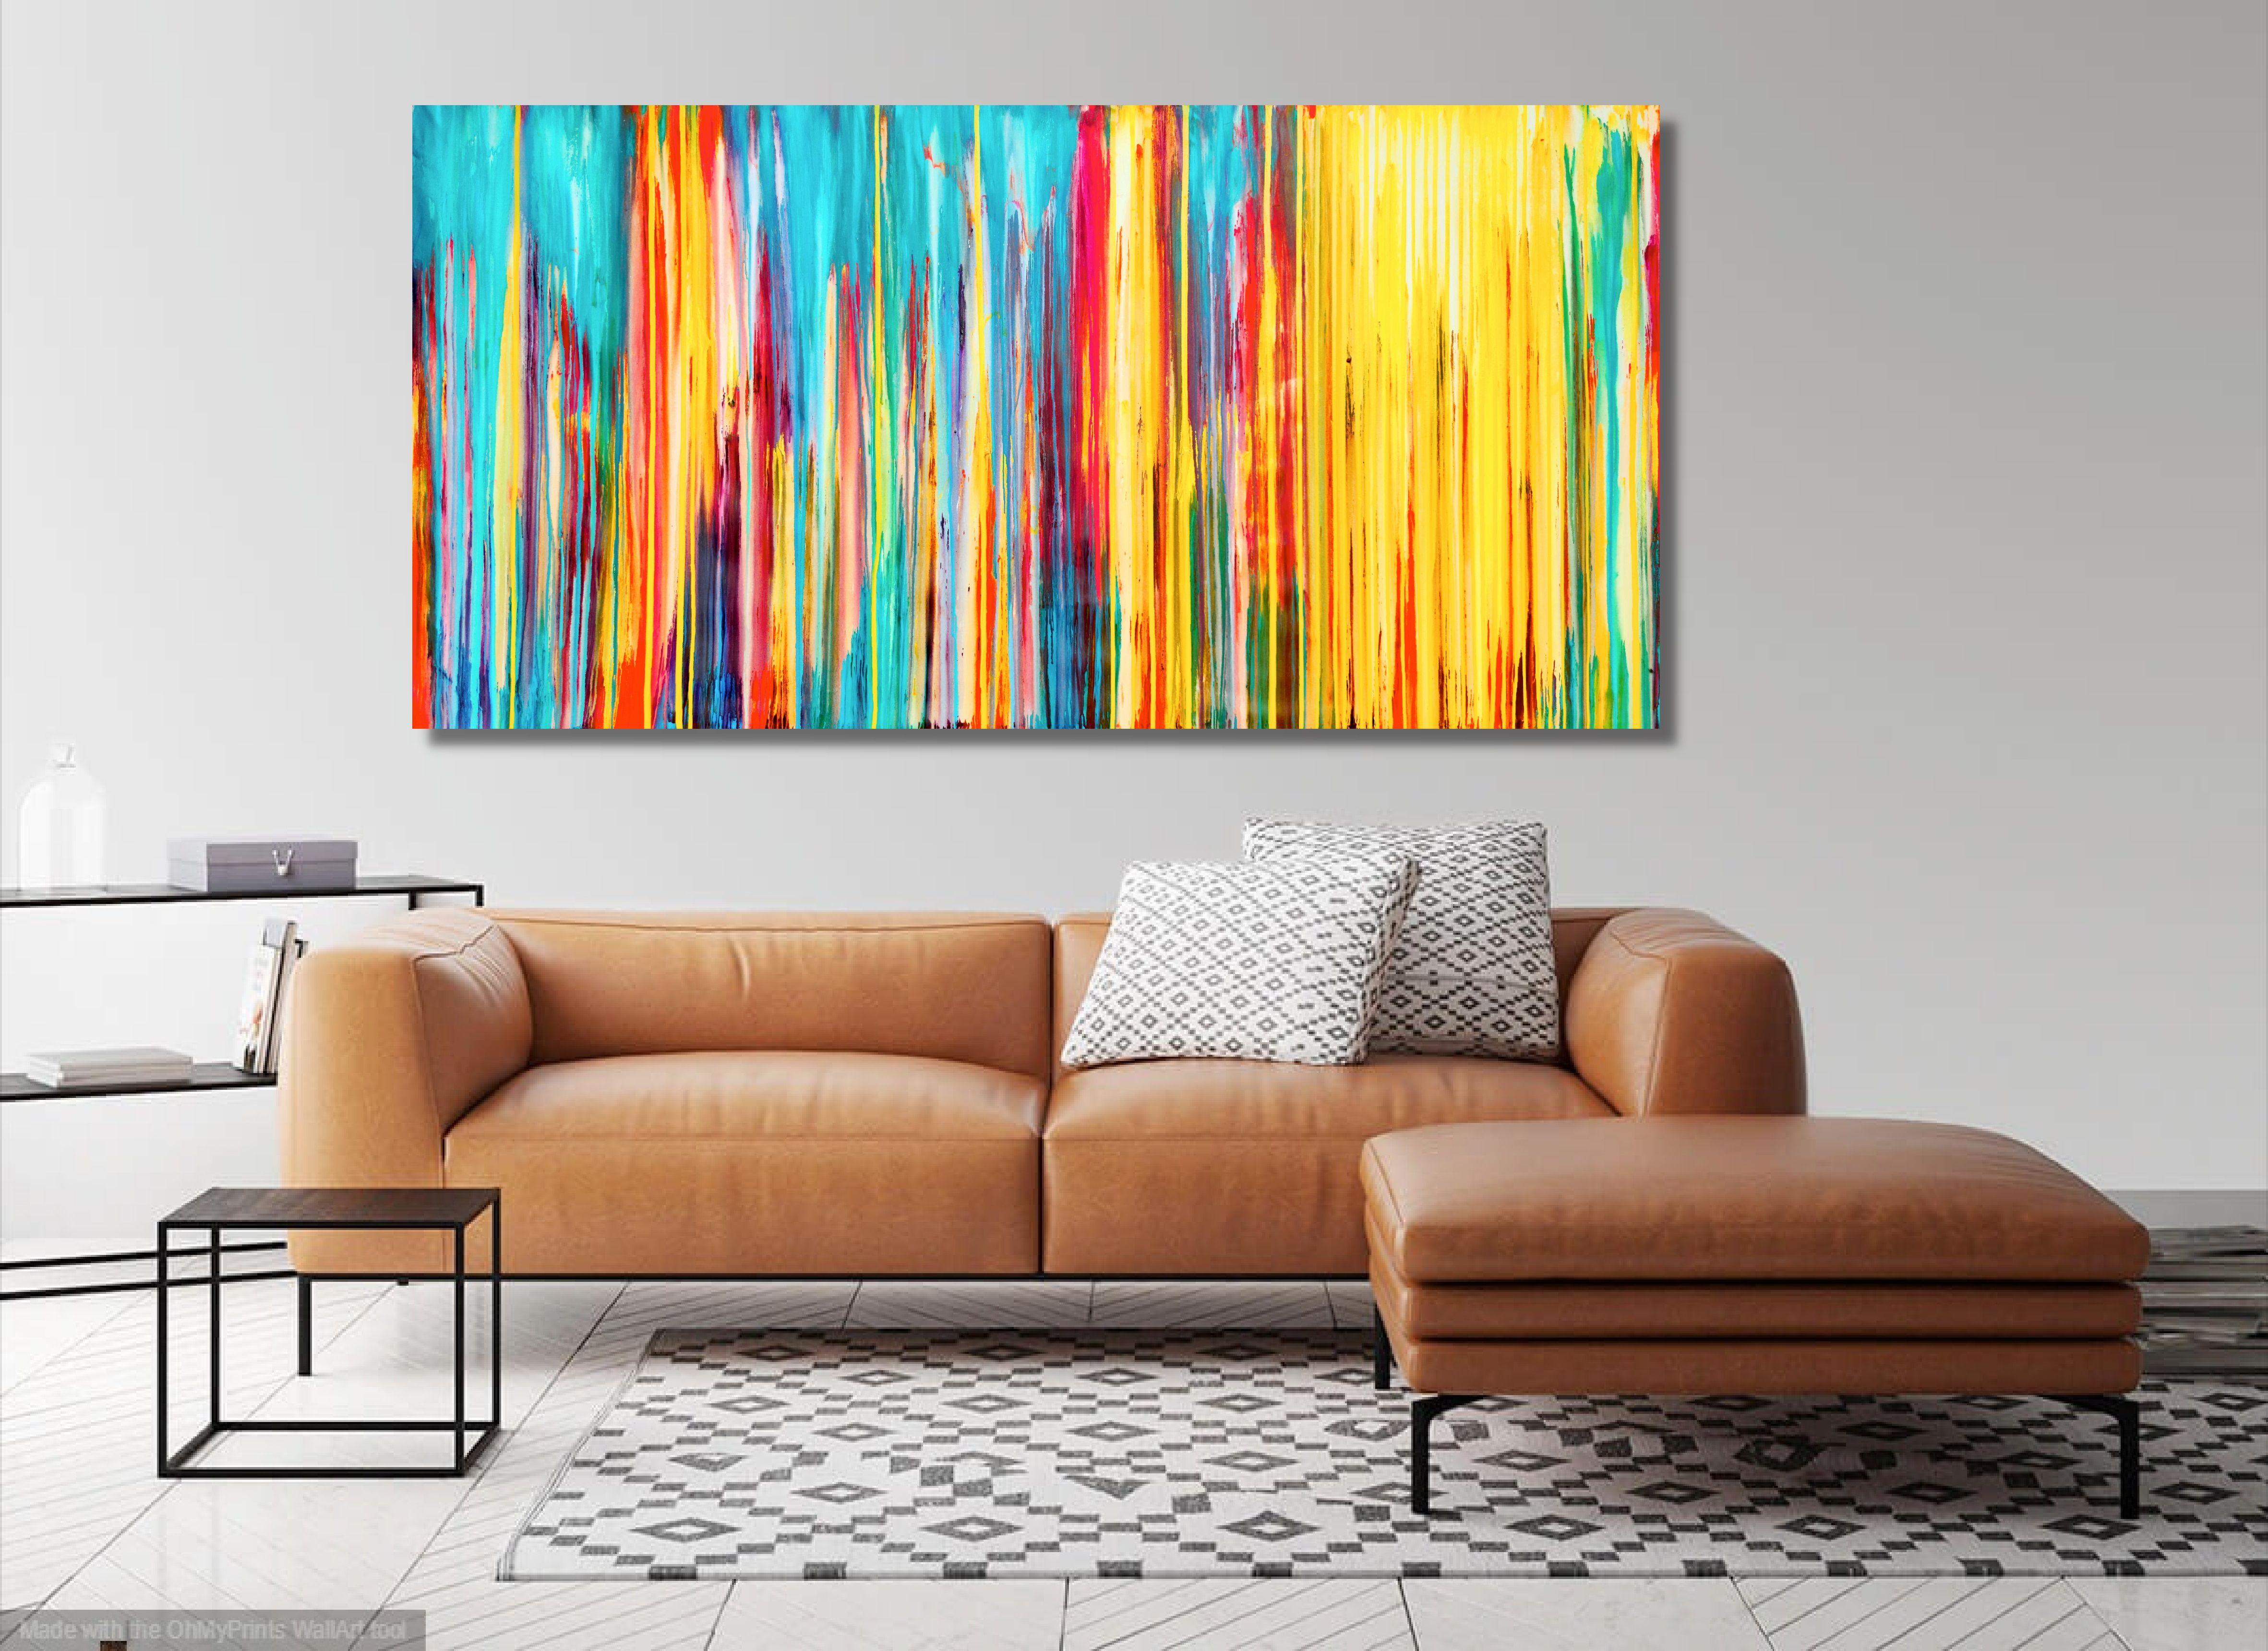 The Emotional Creation #320, Painting, Acrylic on Canvas - Orange Abstract Painting by Carla Sá Fernandes